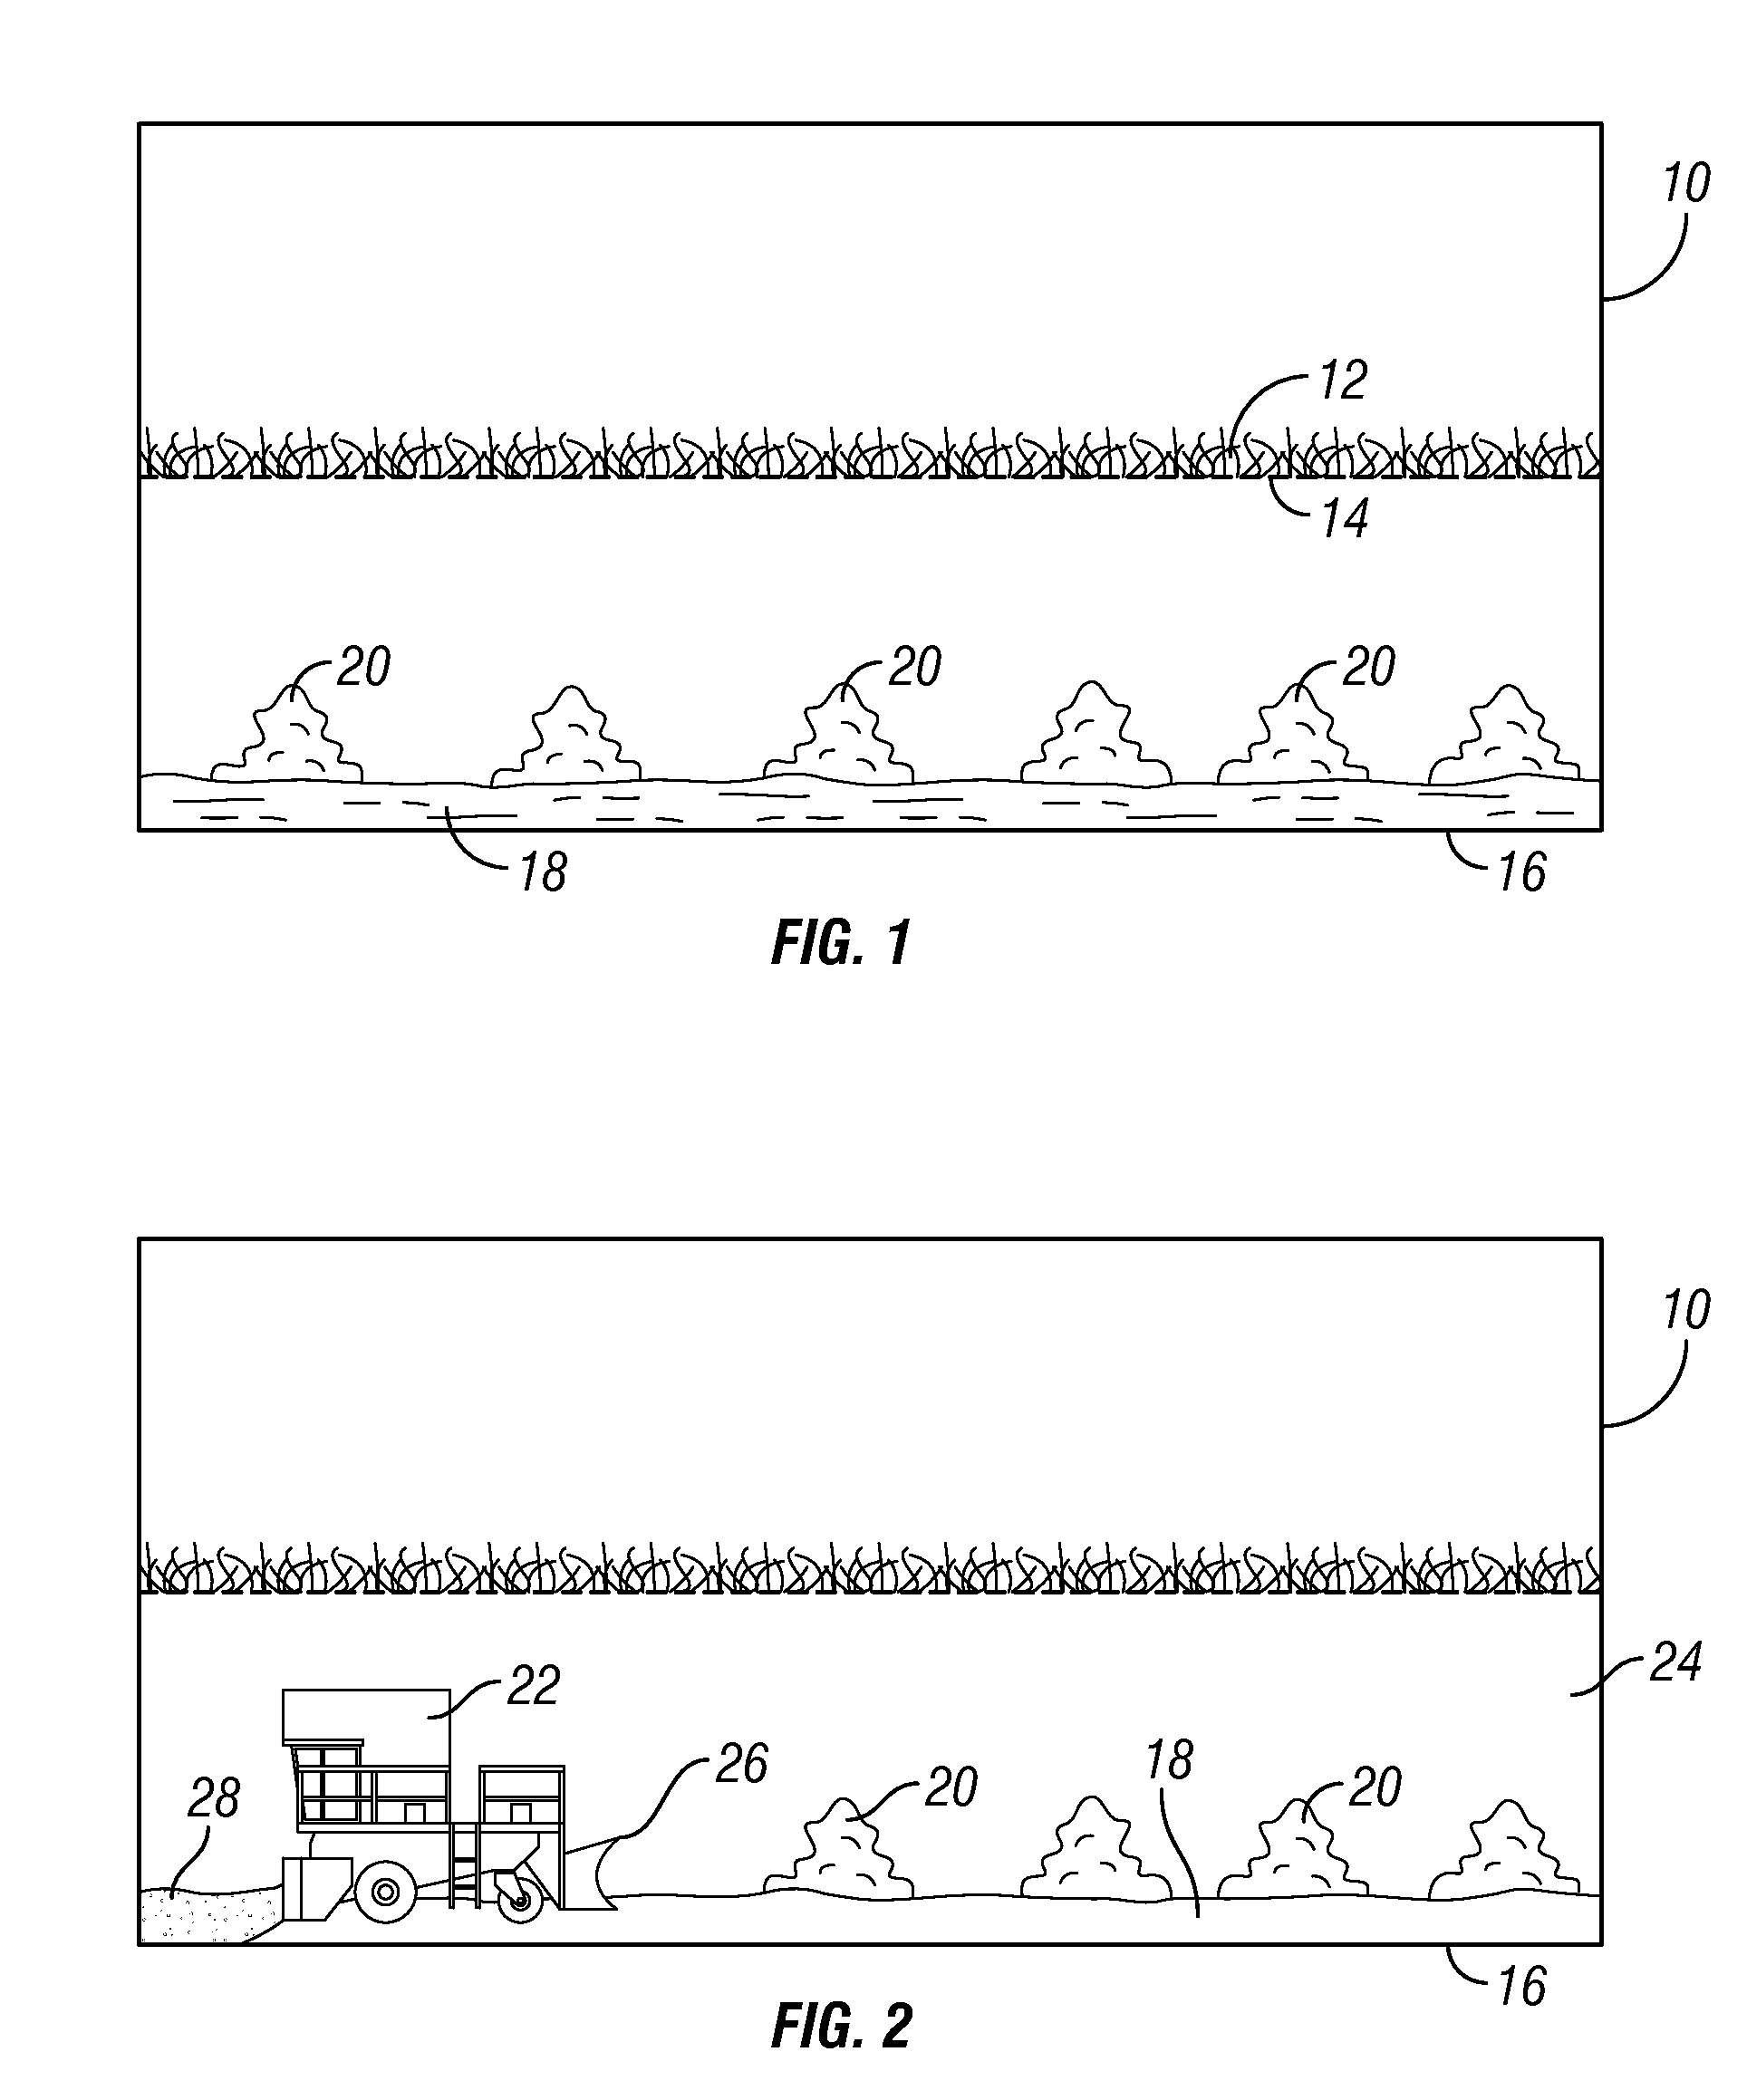 Method of treating waste from a chicken house using short paper fibers